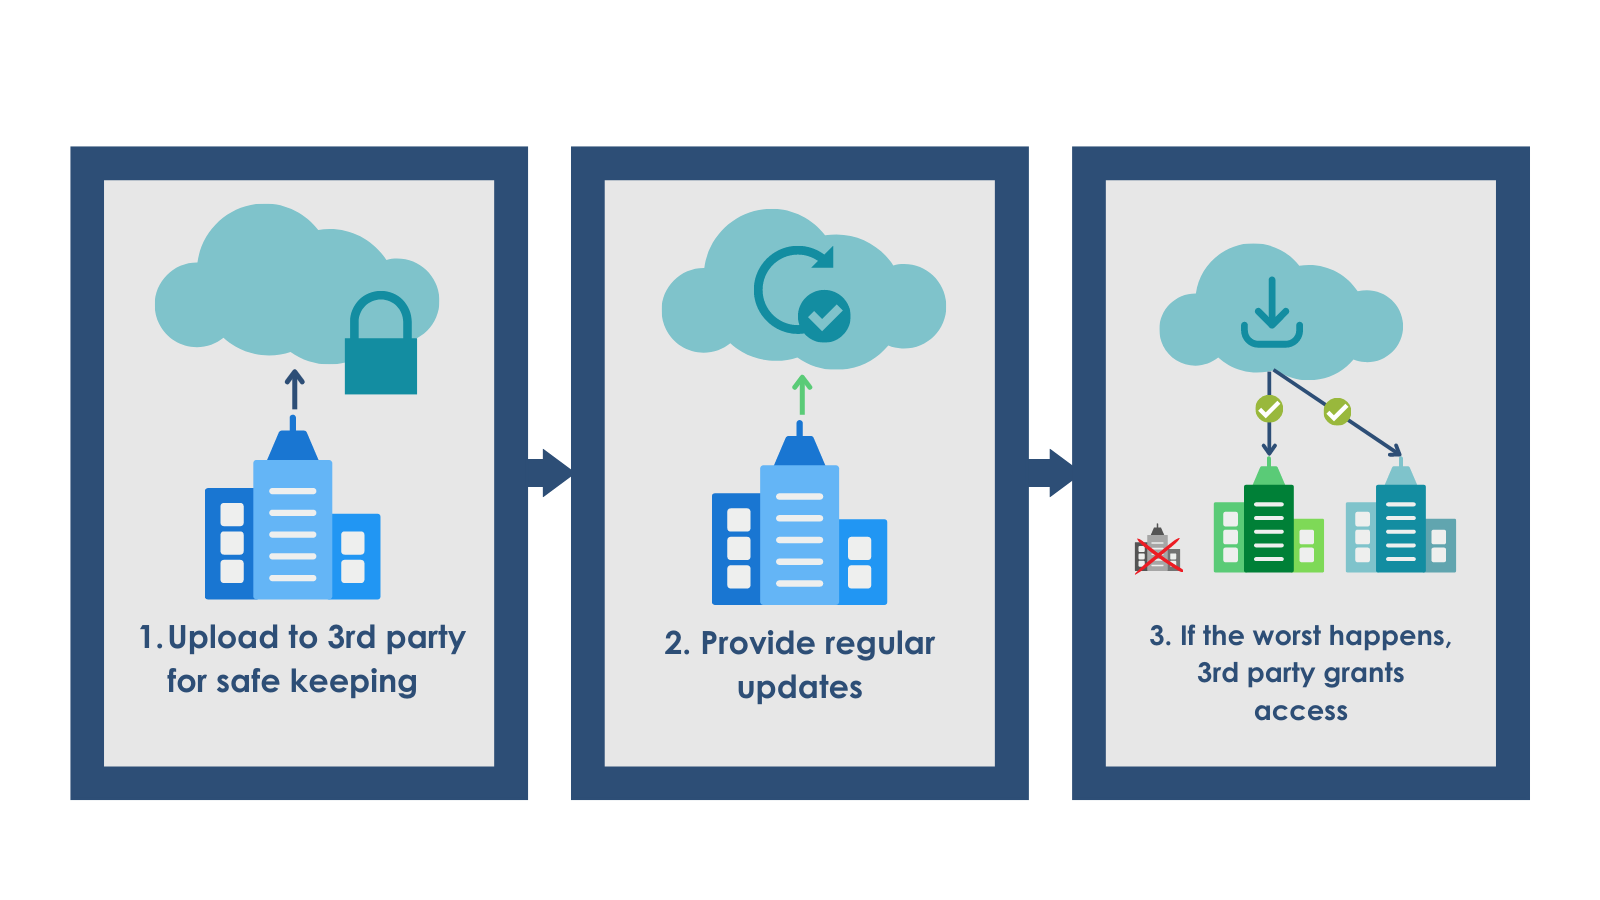 Image of three blocks explaining escrow as a service. The first block shows an arrow moving from an office into the cloud. The second block features an arrow from the office into the cloud with a circular arrow in the cloud. The third block shows two different offices downloading from the cloud.